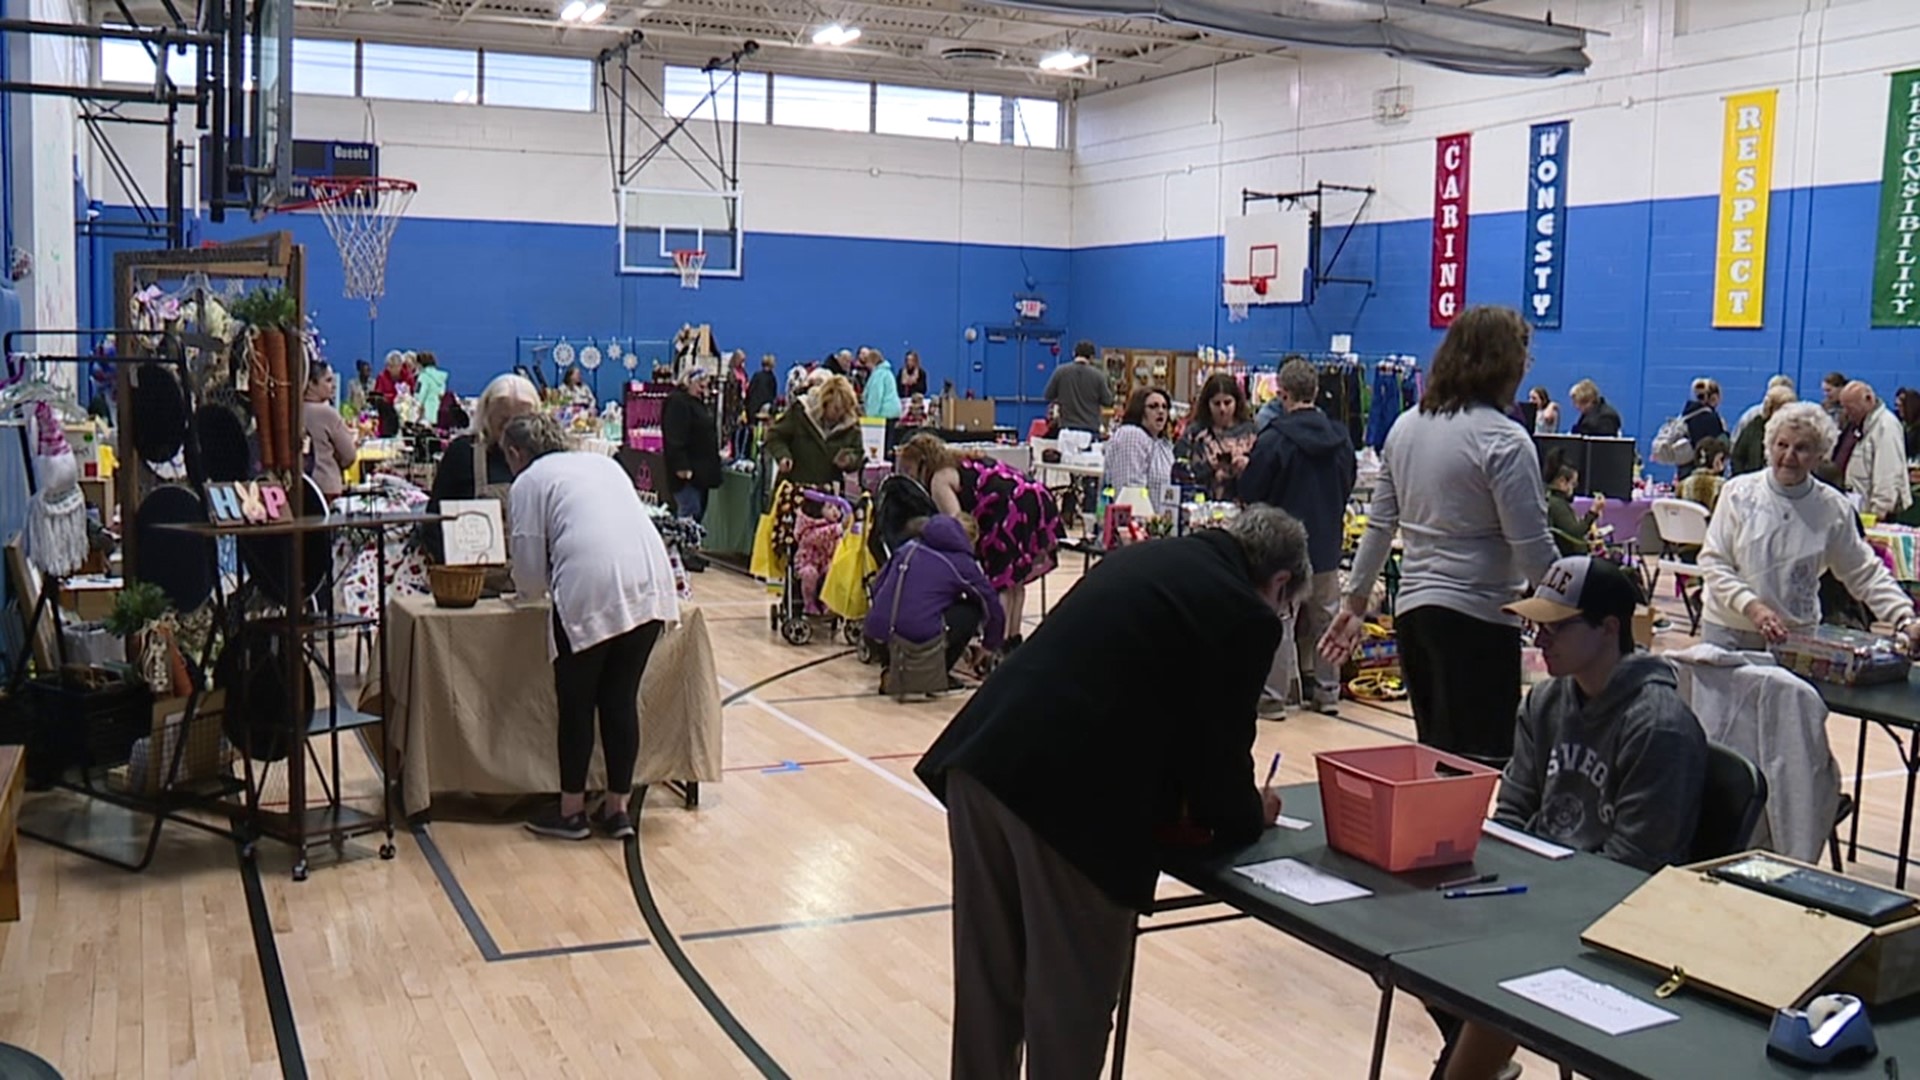 The Carbondale YMCA held its annual craft and vendor fair Sunday.